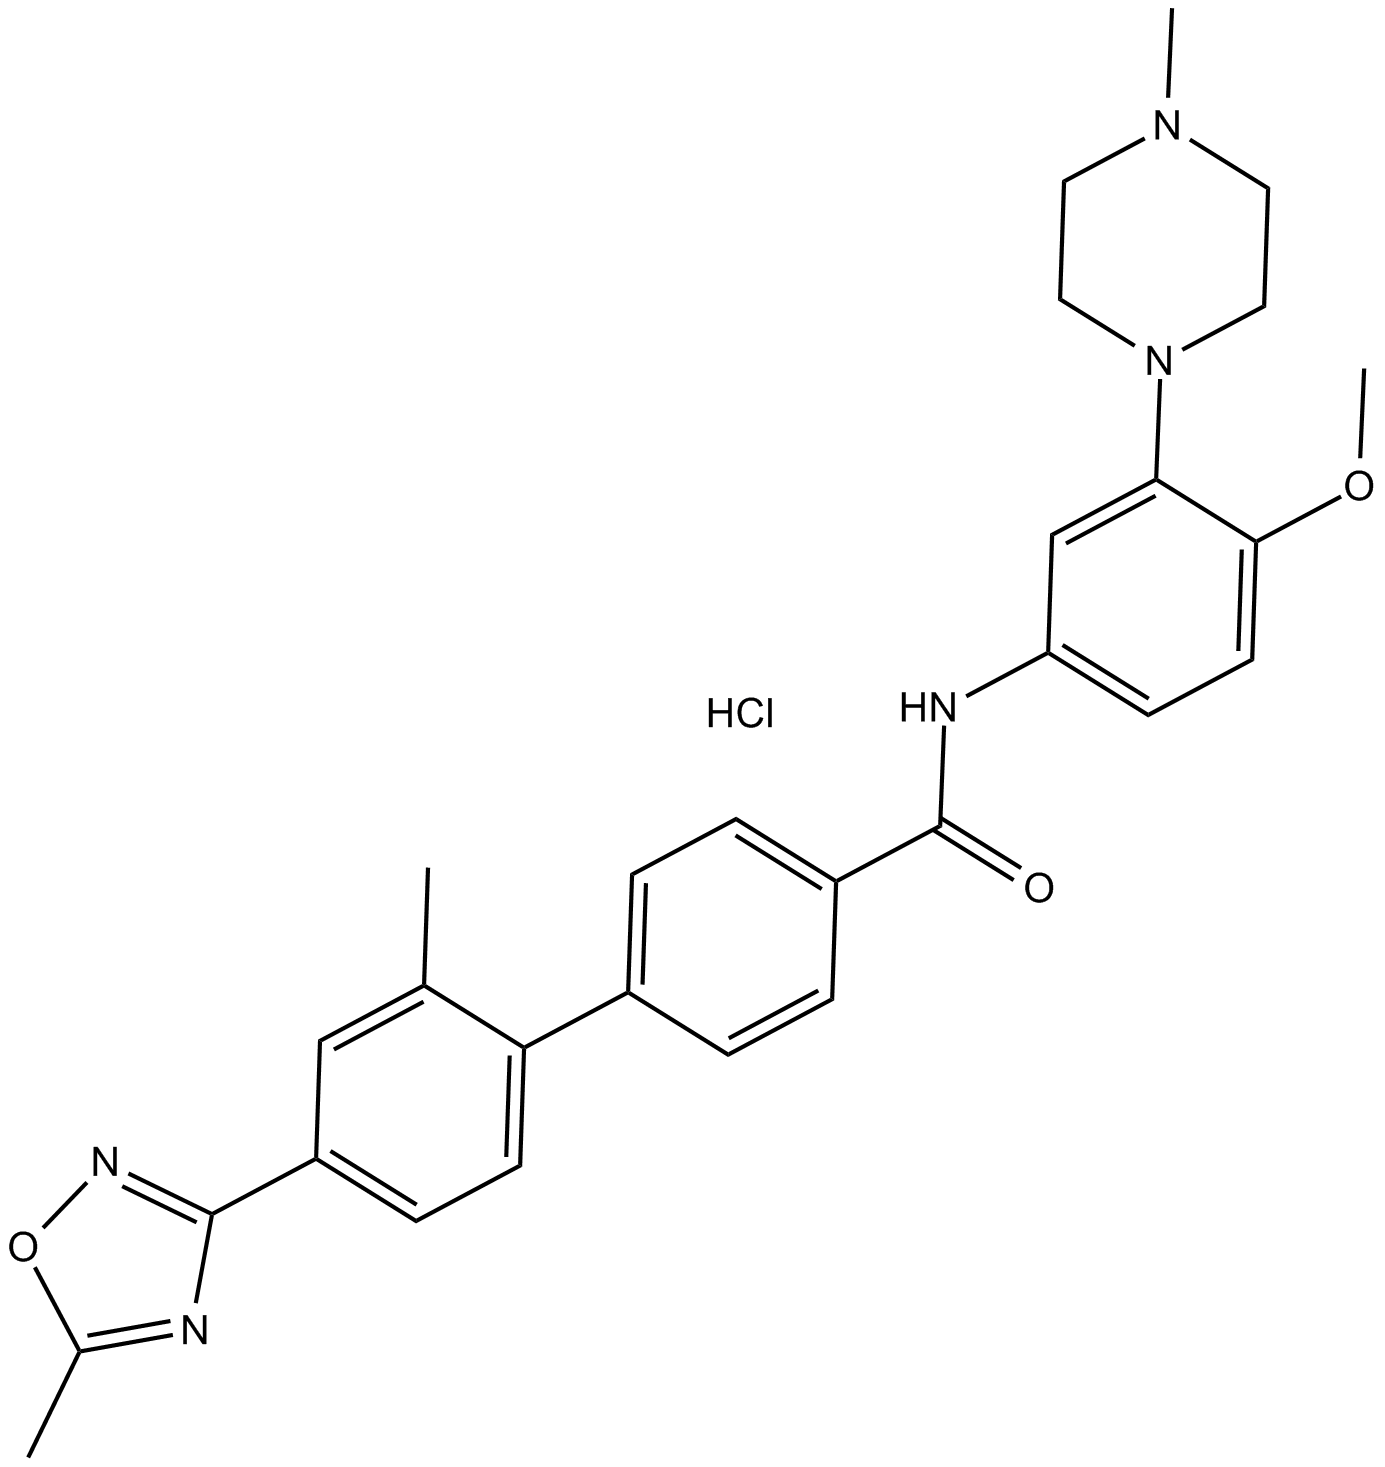 GR 127935 hydrochloride  Chemical Structure